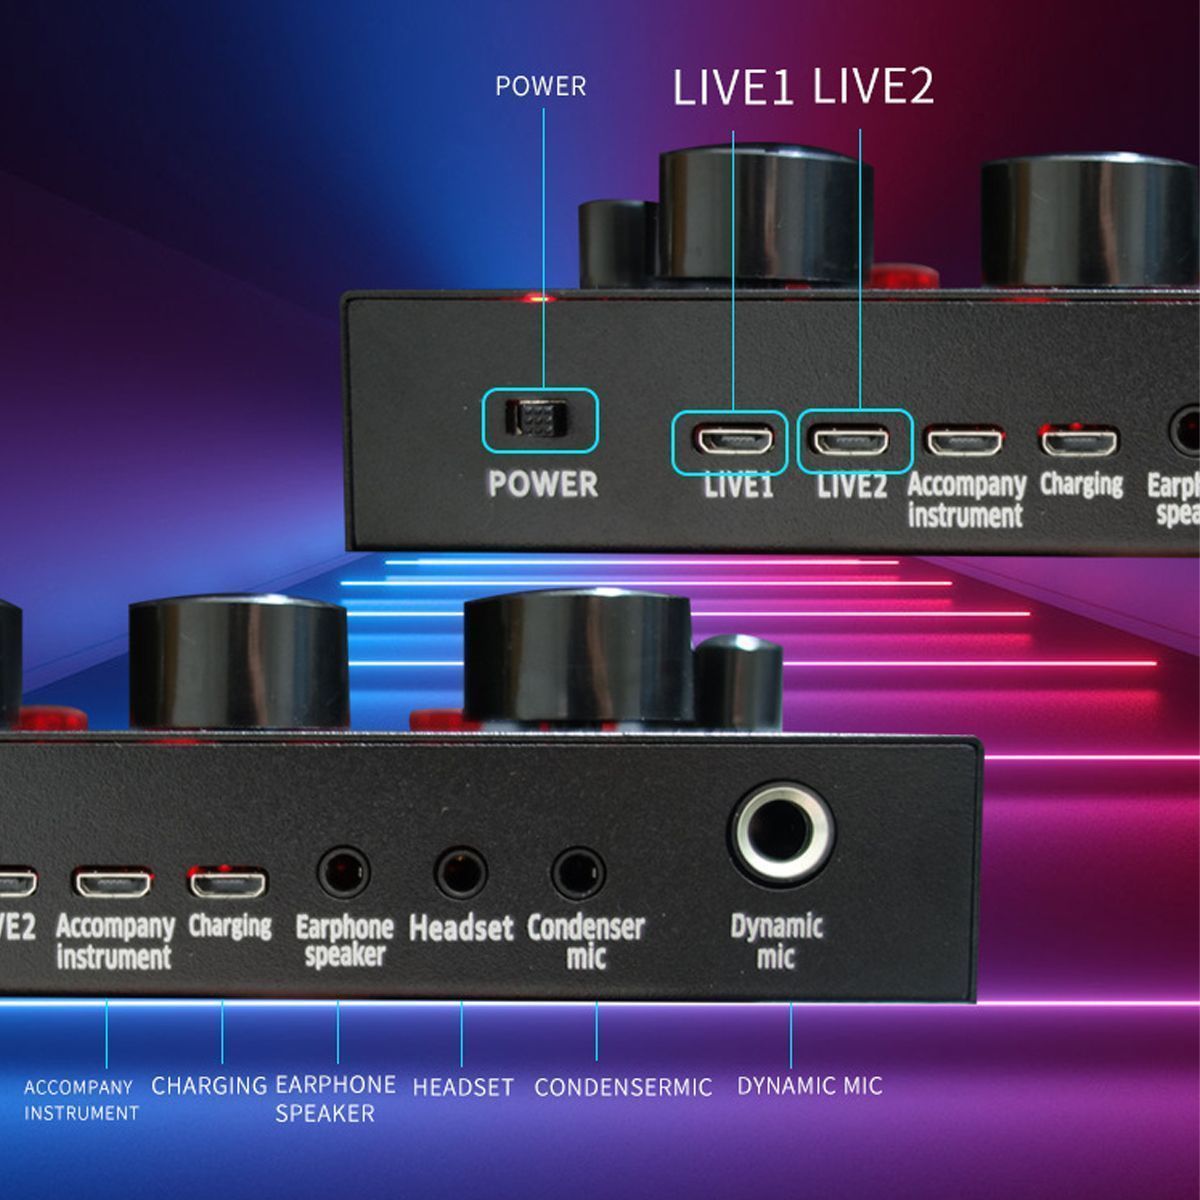 V811-Live-Sound-Card-Electronic-Sounds-KTV-Anchors-Singing-3-Modes-Music-Live-Sound-Card-for-Phone-C-1734647